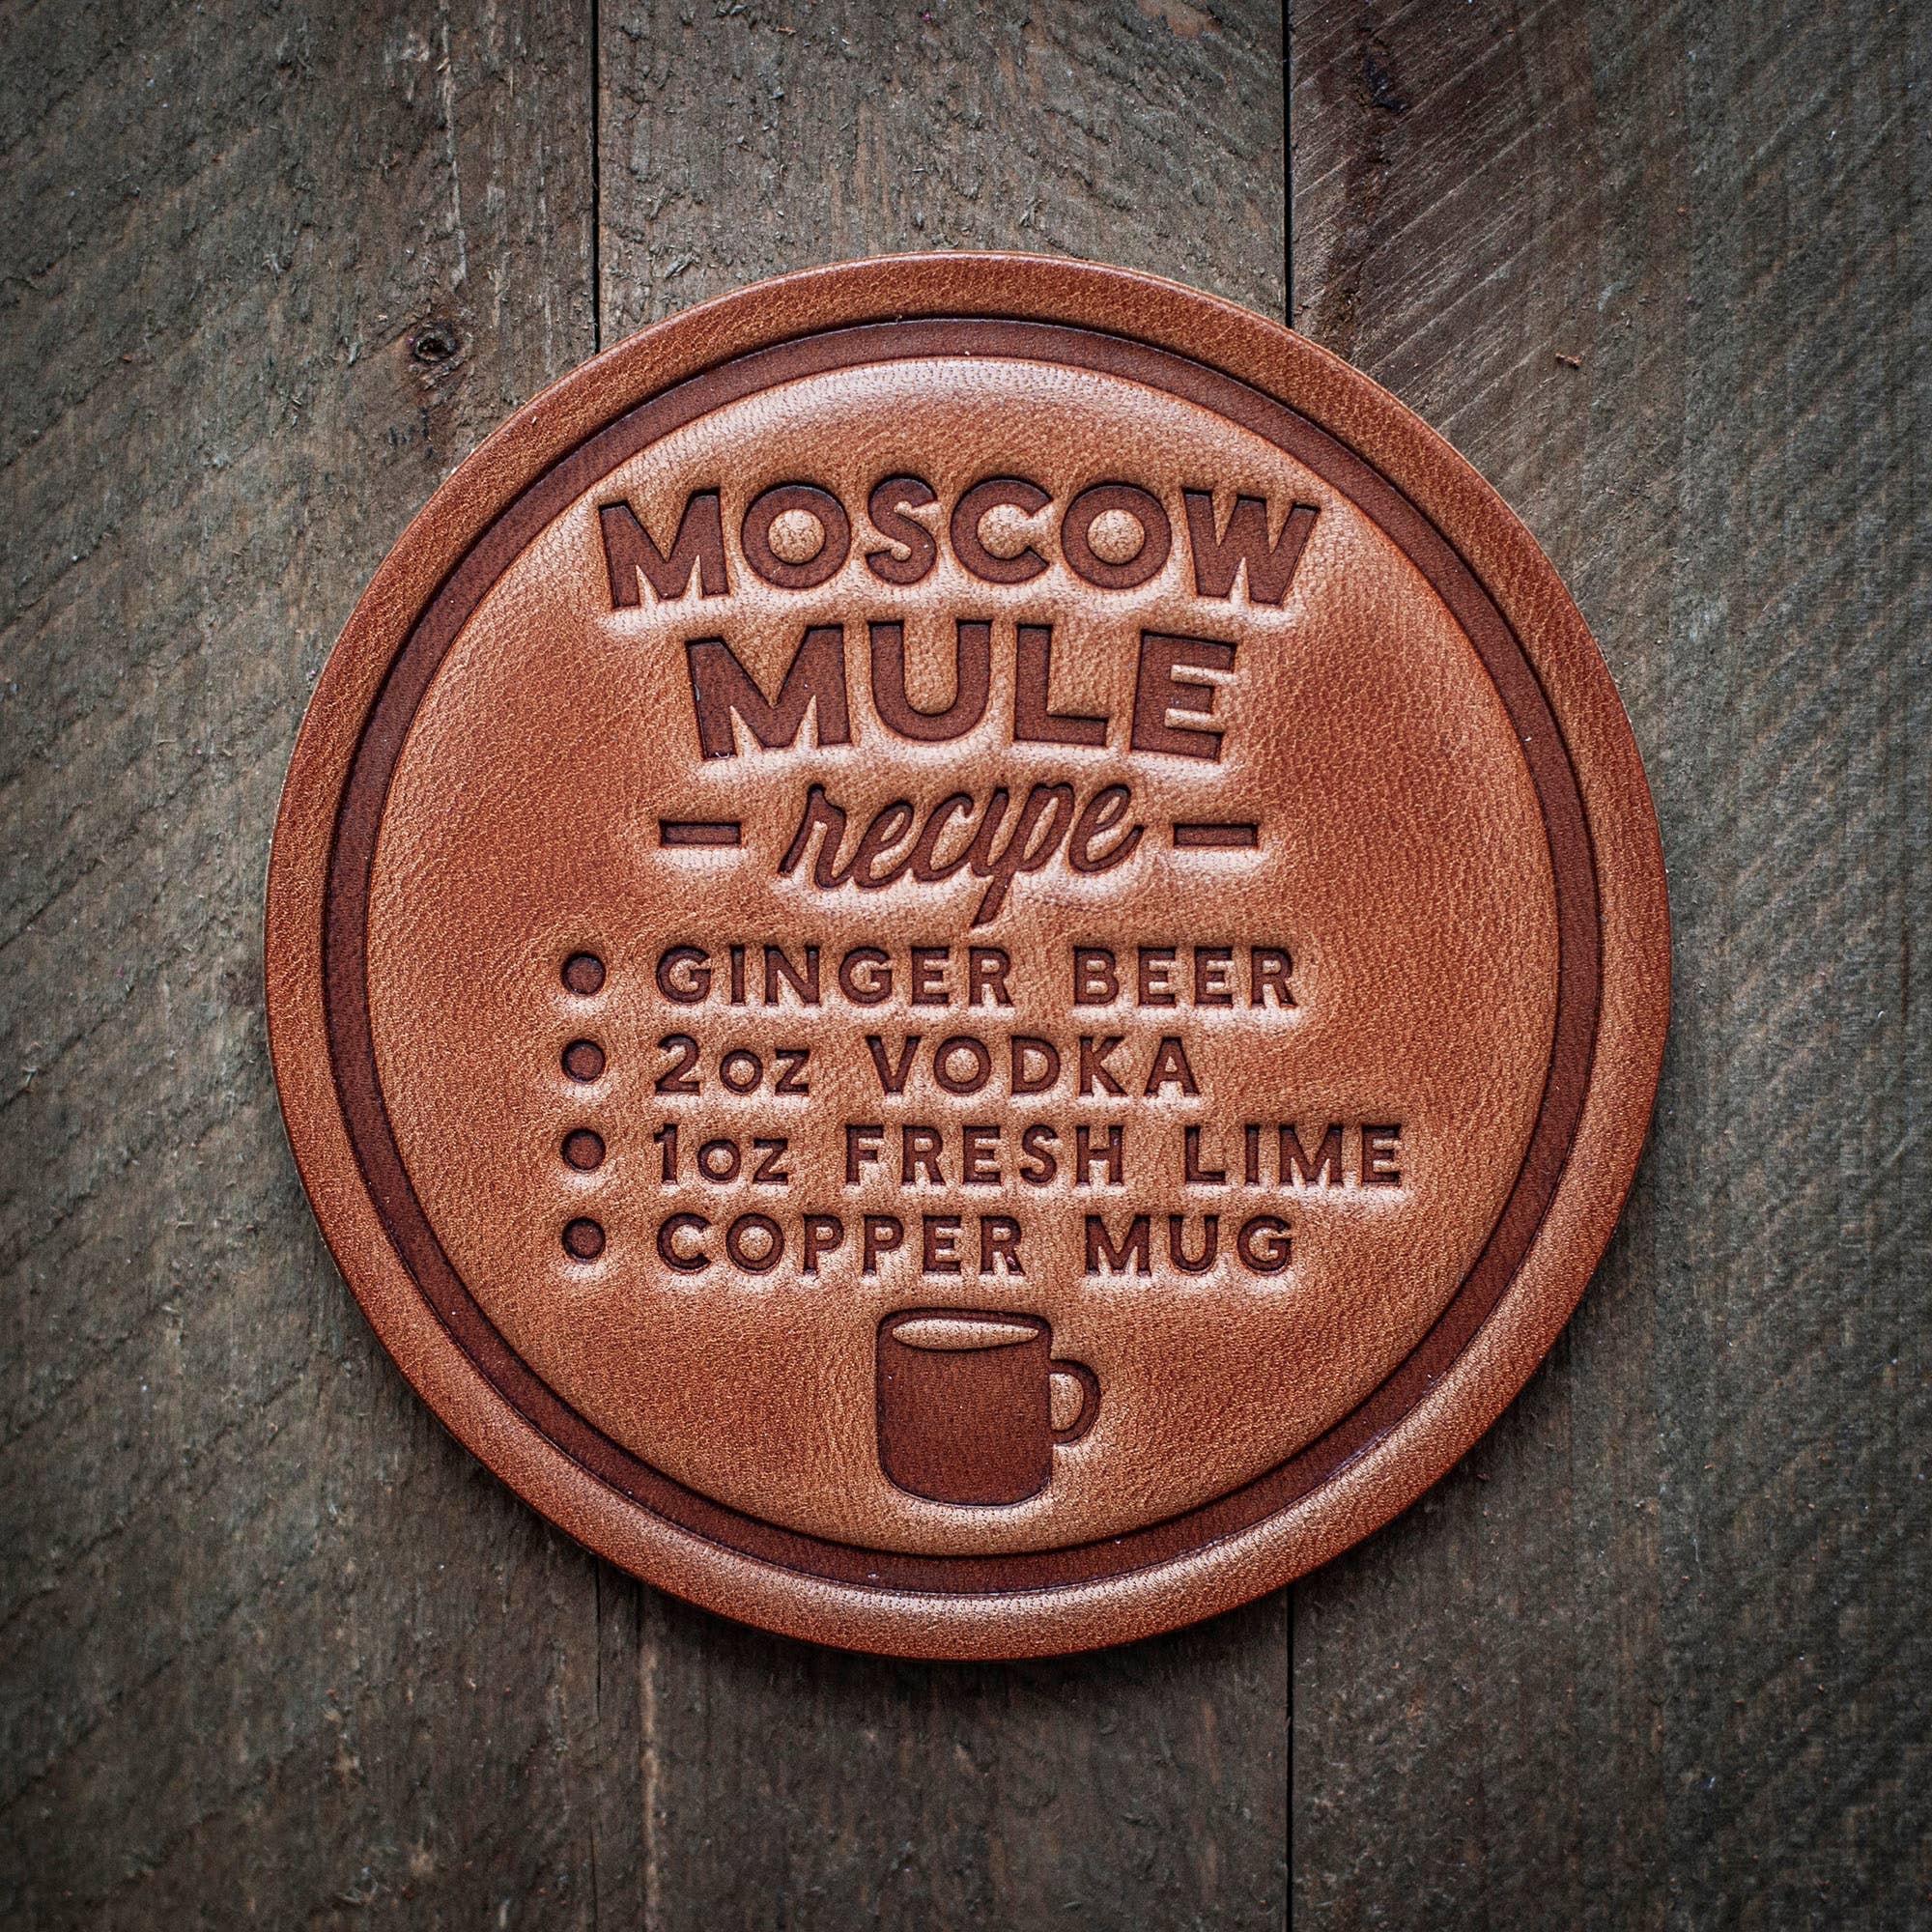 Moscow Mule Recipe Leather Coaster